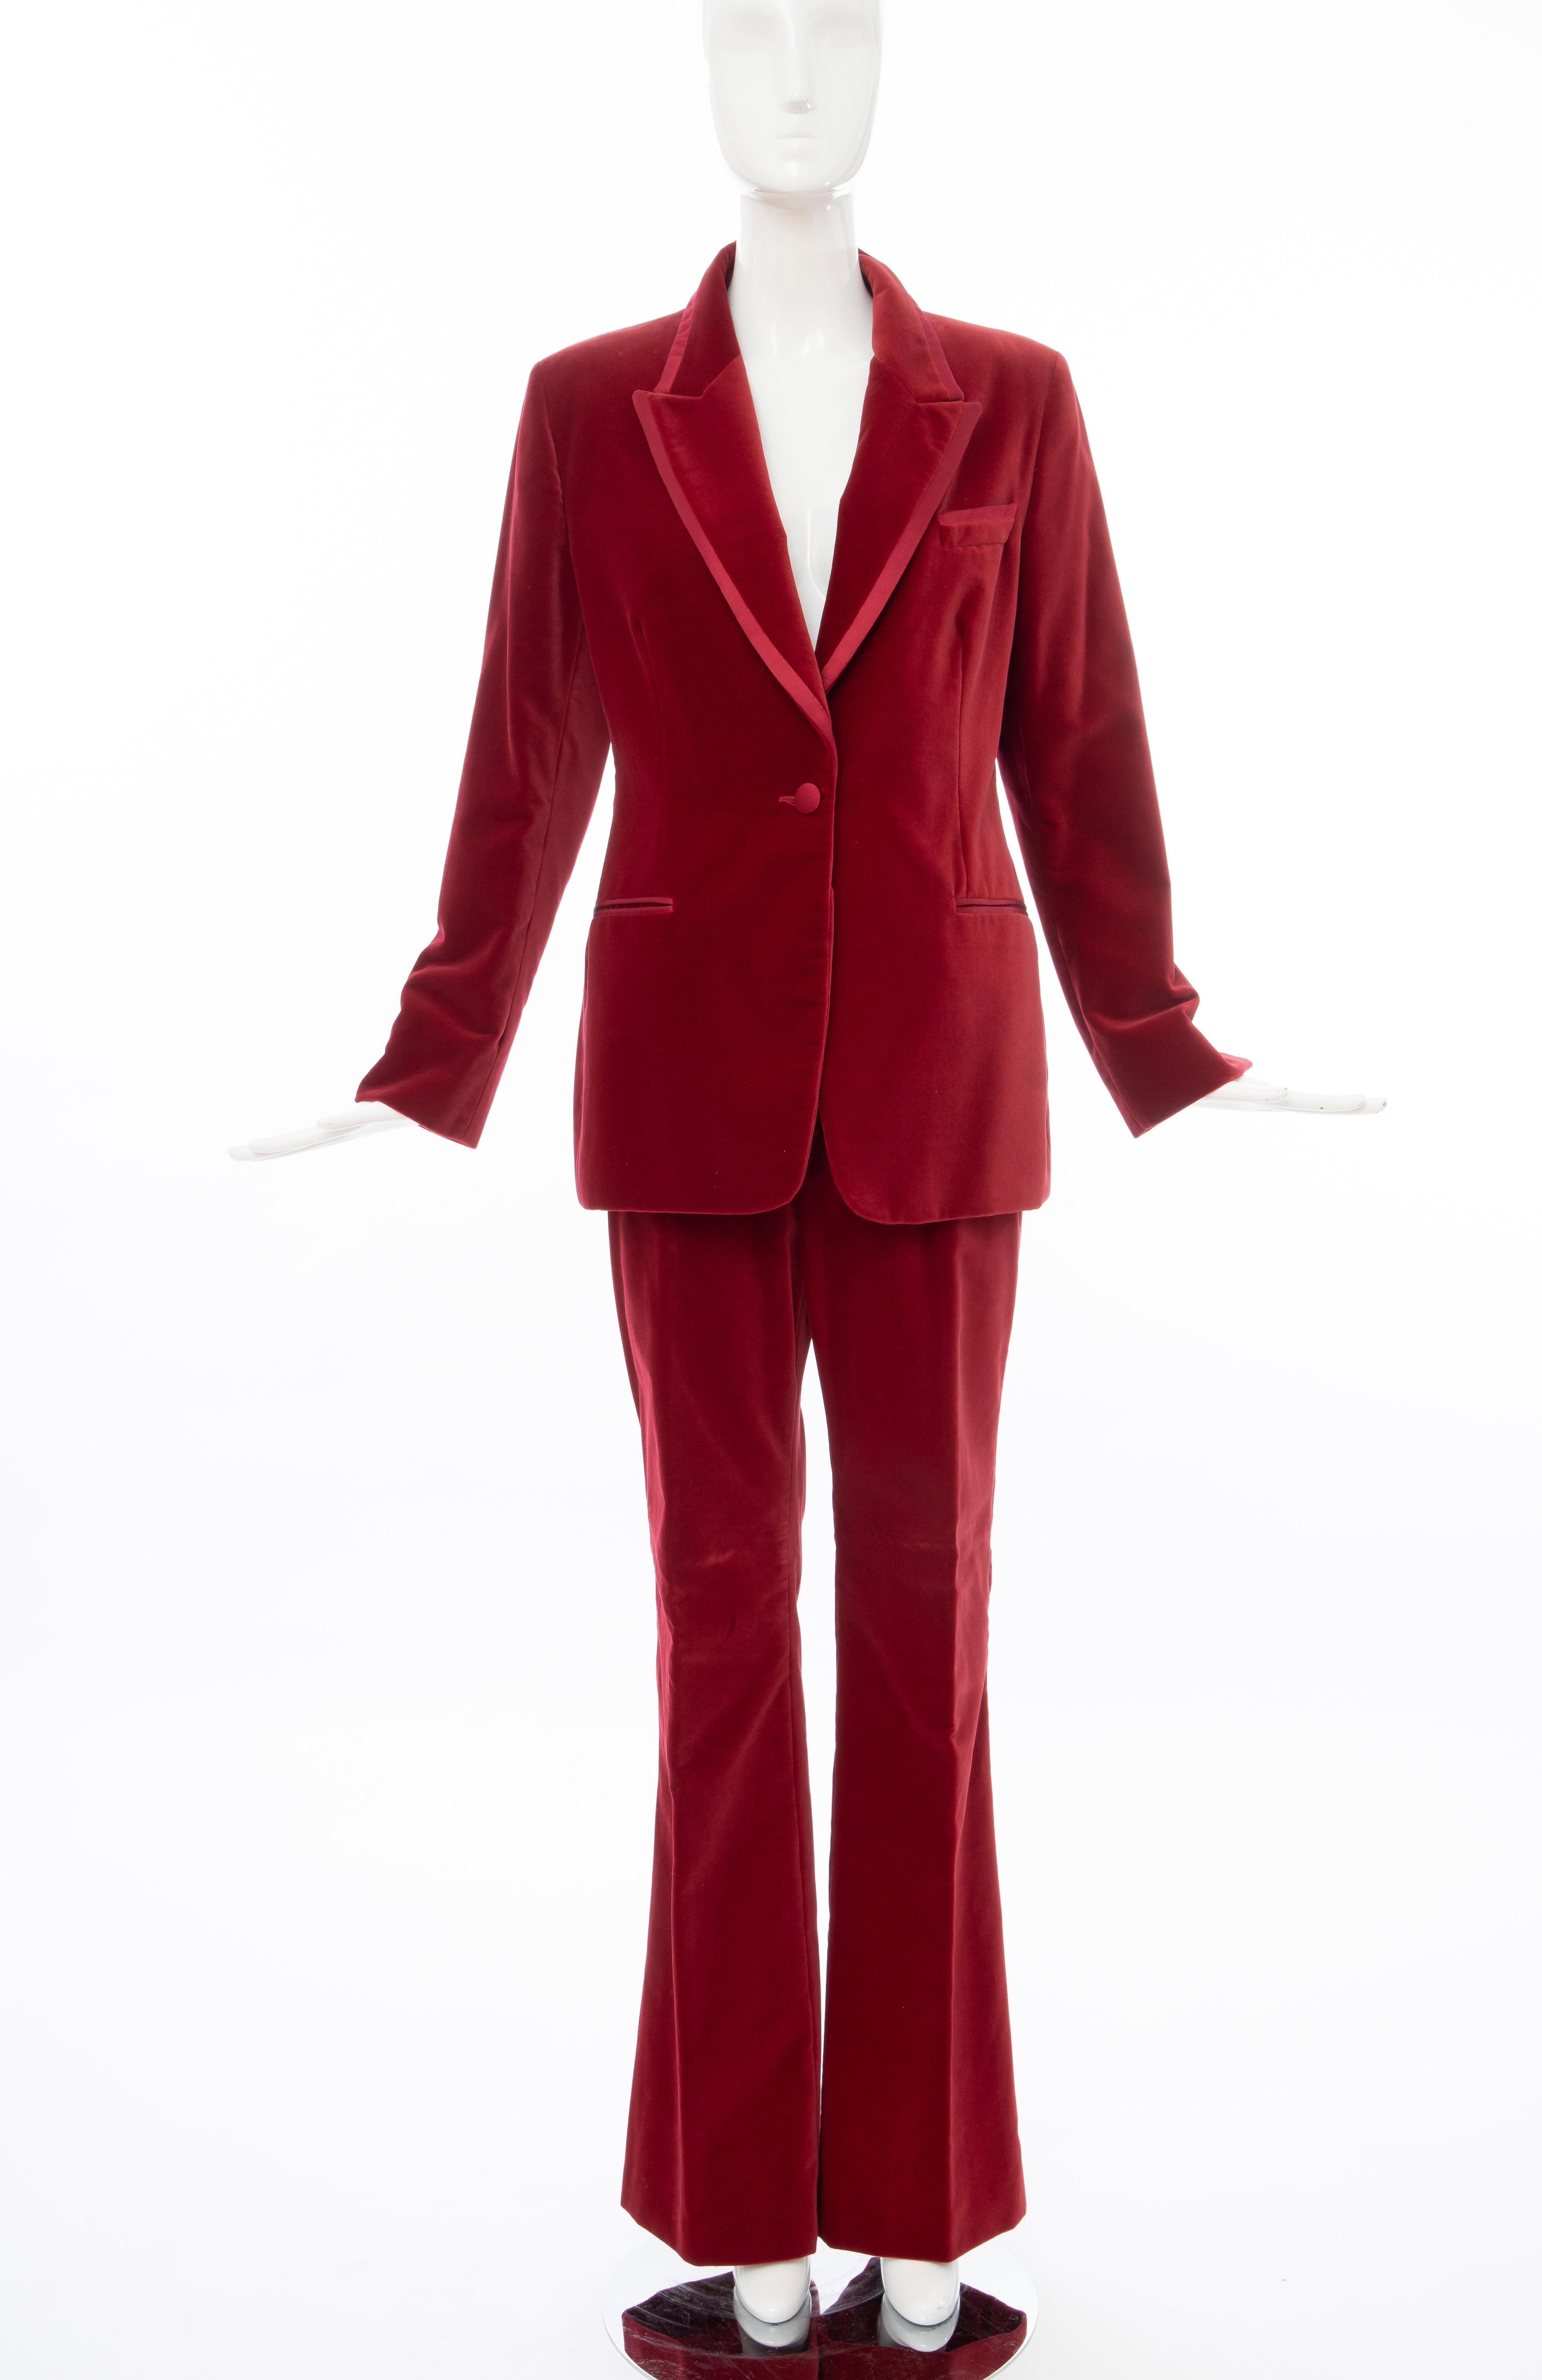 Tom Ford for Gucci, Autumn-Winter 1996, crimson cotton velvet pantsuit. Jacket features dual welt pockets at waist, slit pocket at bust, contrast panel at collar and single button closure at front. Pants feature dual slit pockets at waist, dual welt